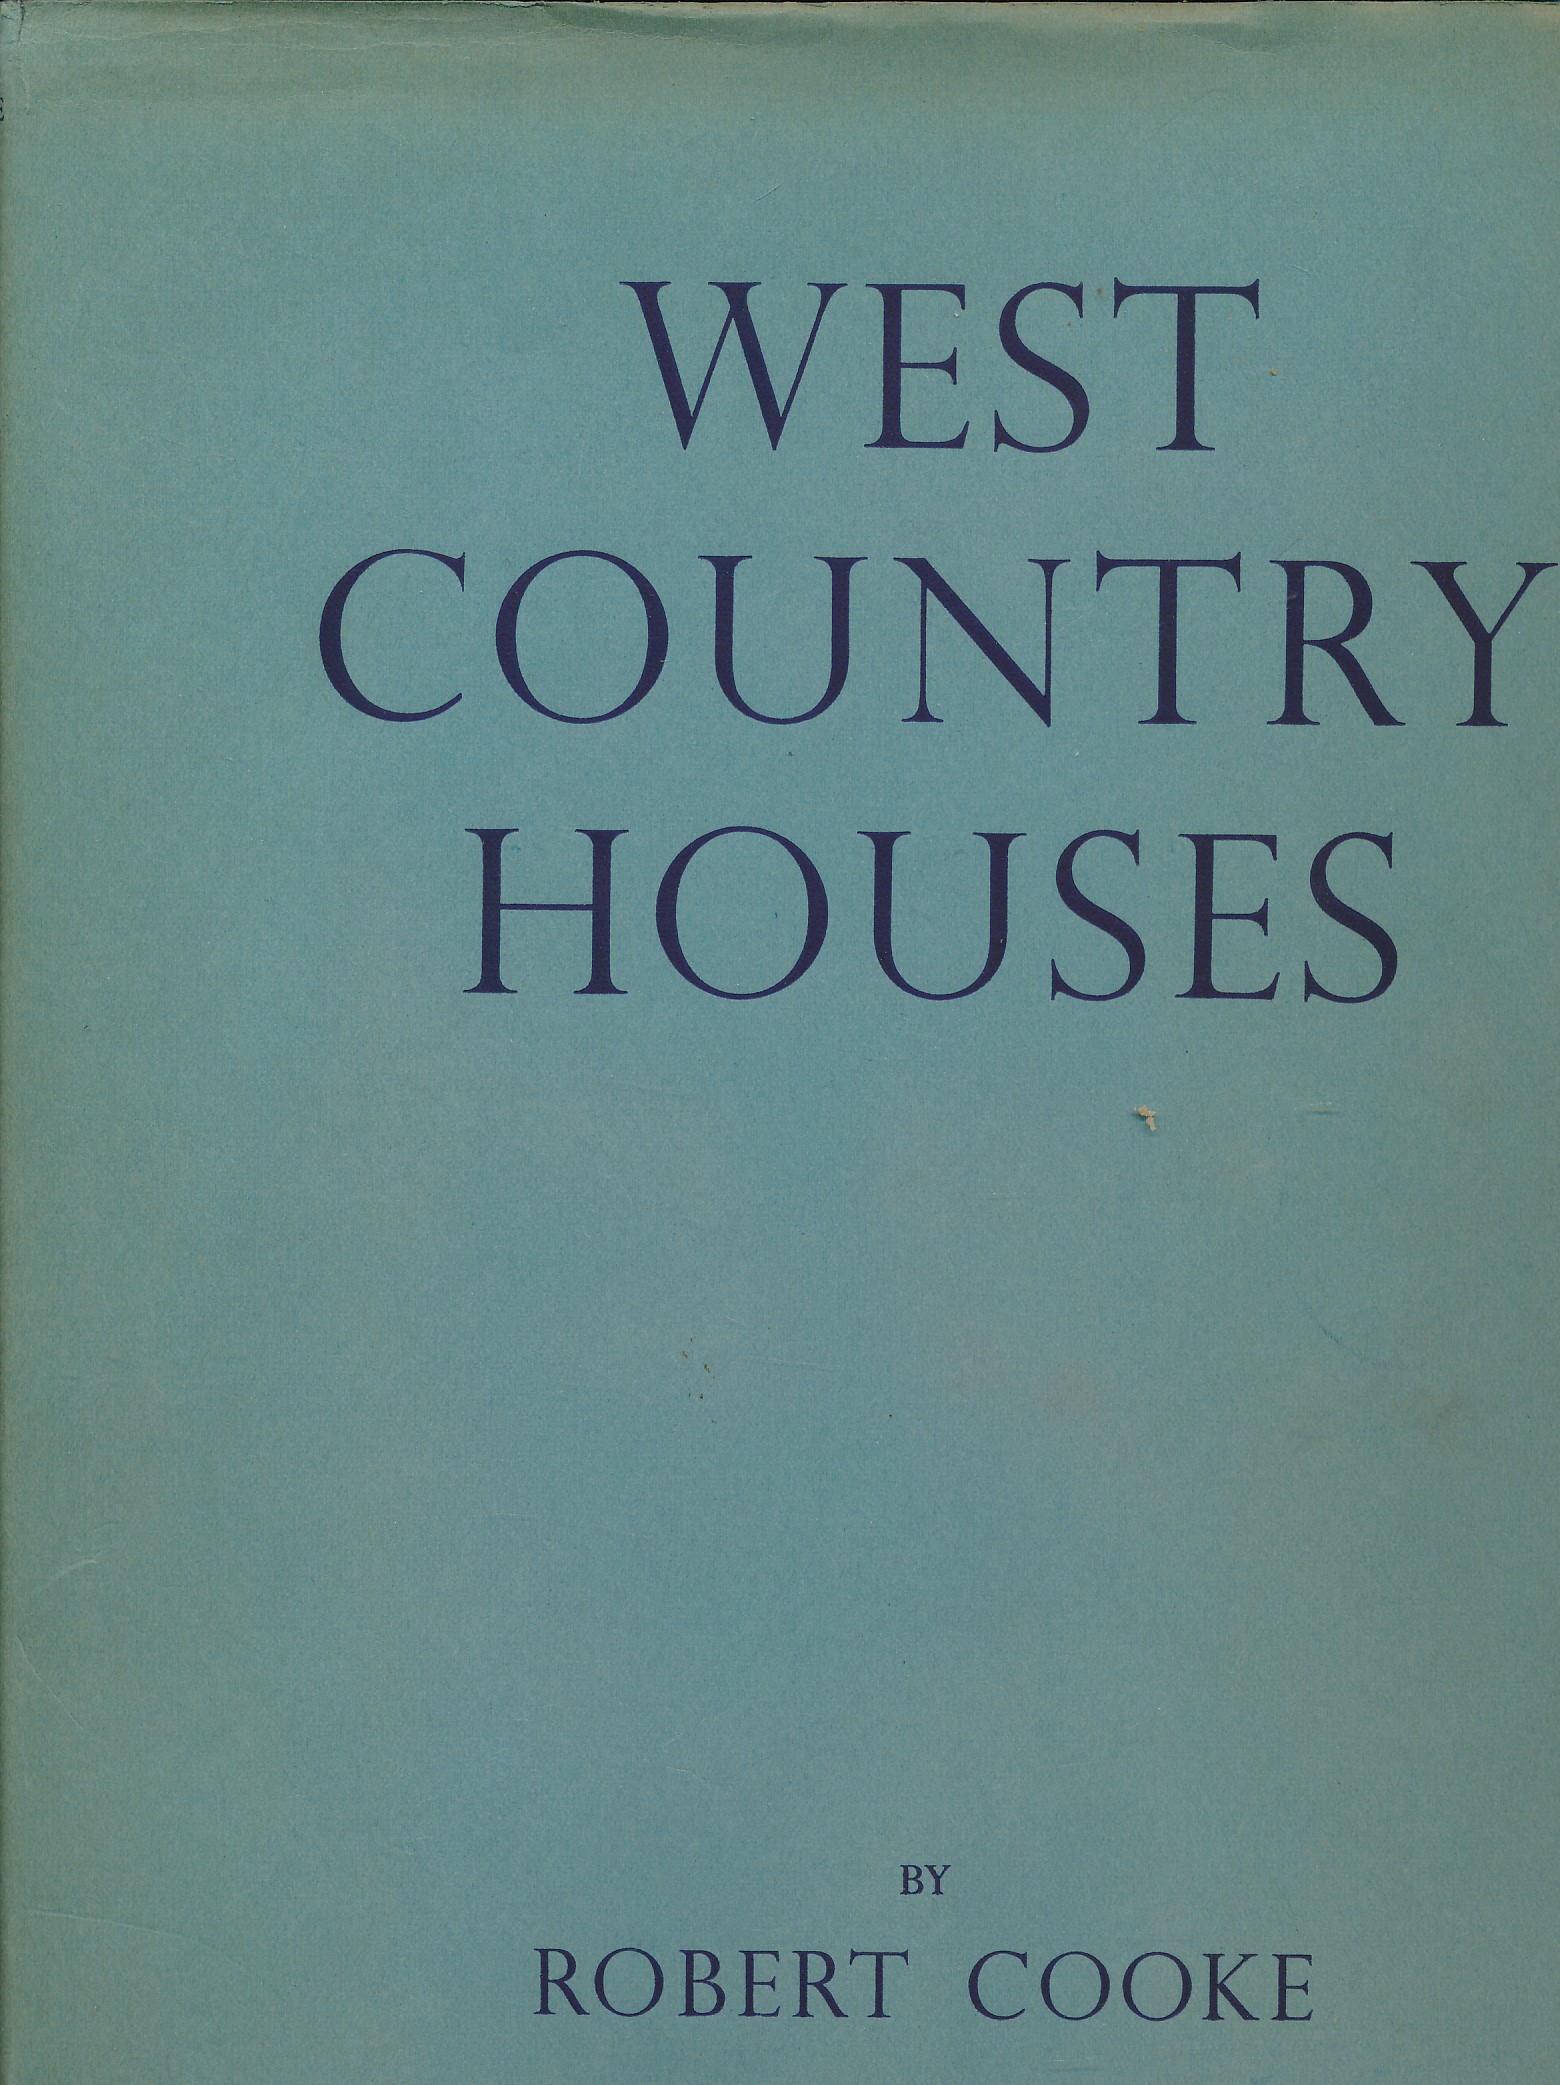 West Country Houses. An Illustrated Account of Some Country Houses and Their Owners, in the Counties of Bristol, Gloucester, Somerset and Wiltshire